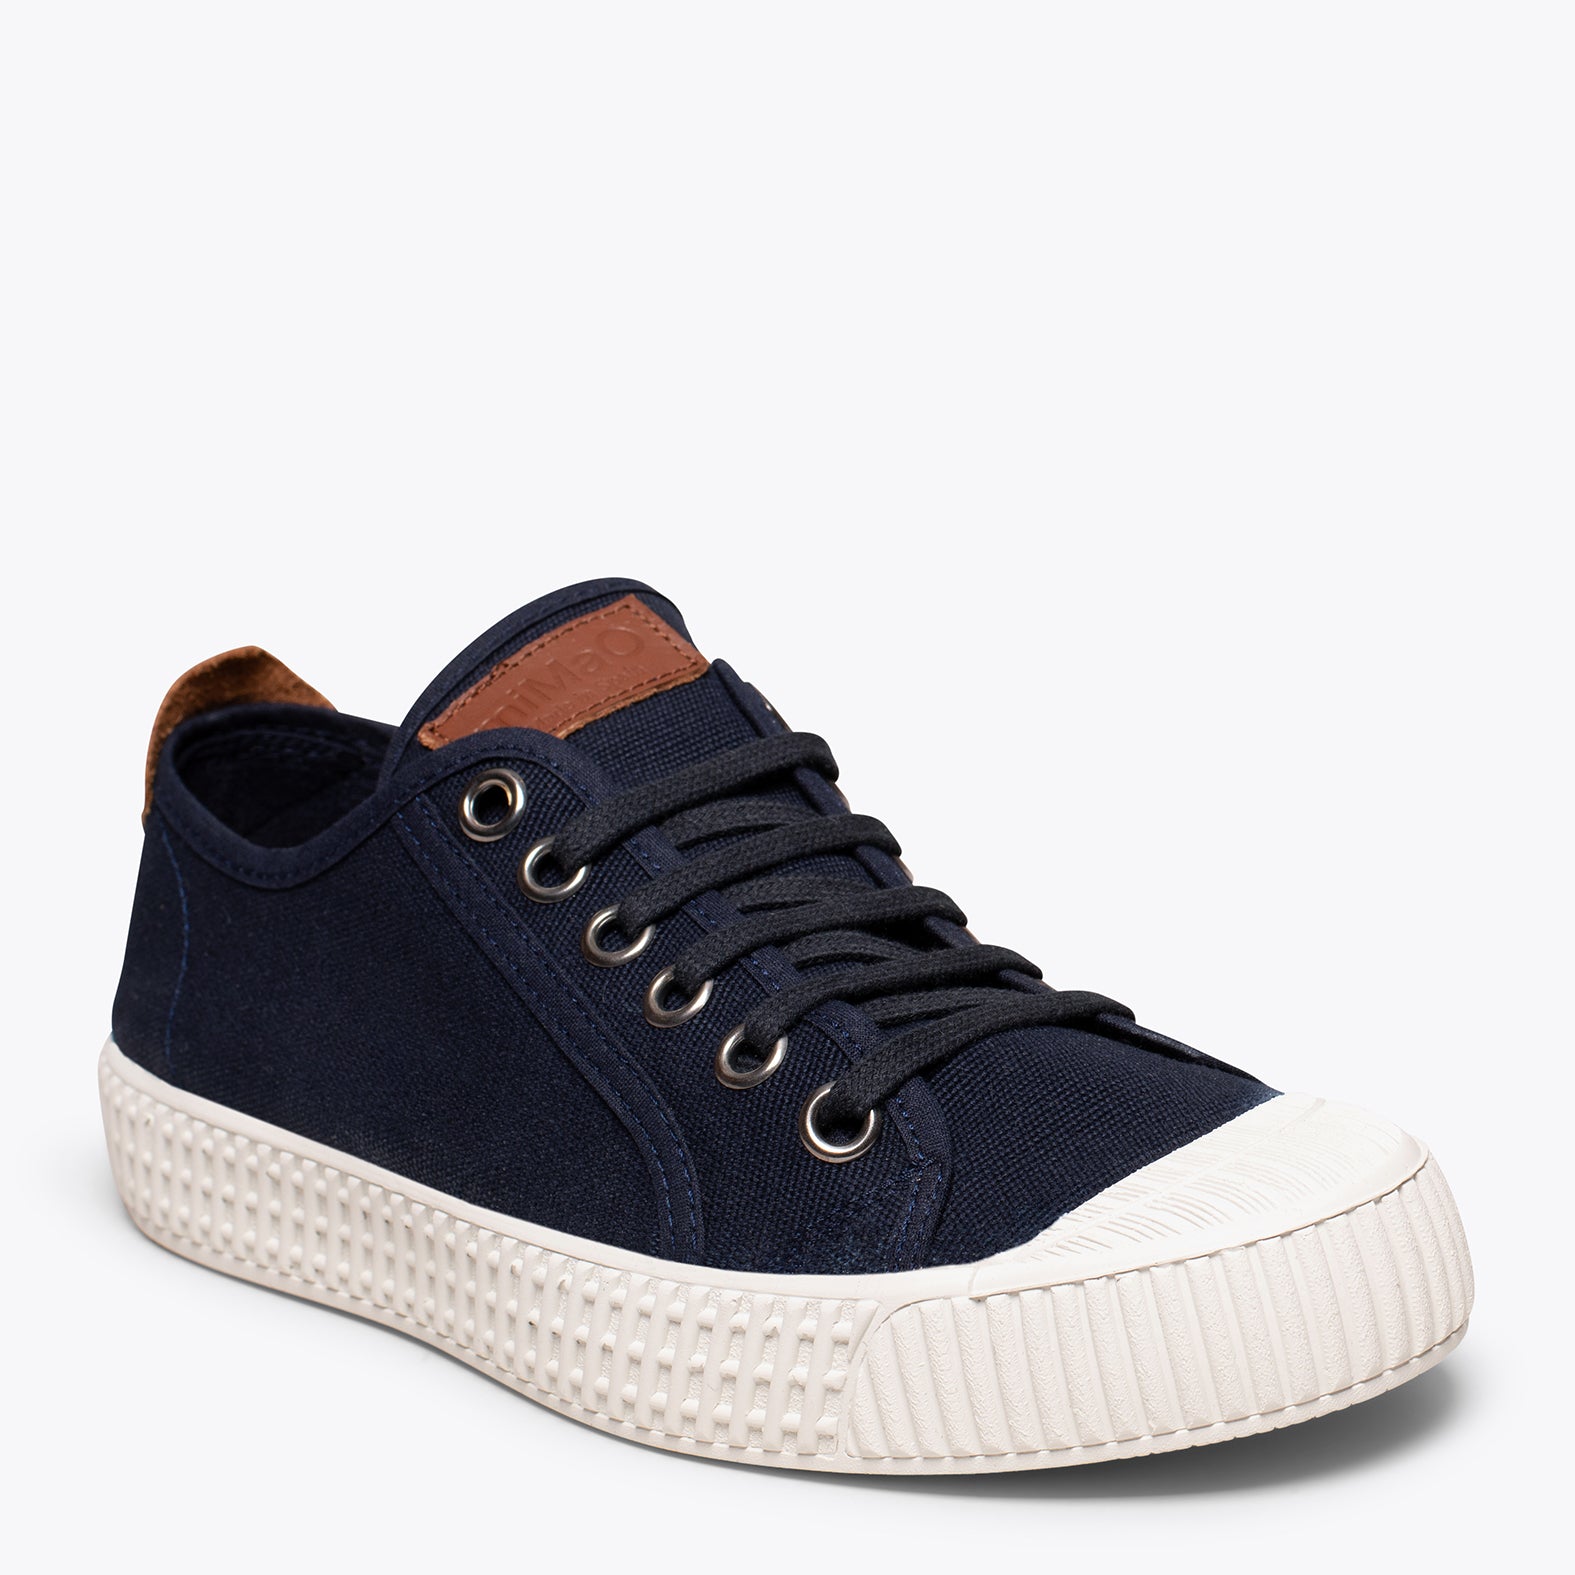 BAMBA – NAVY water-repellent canvas sneakers